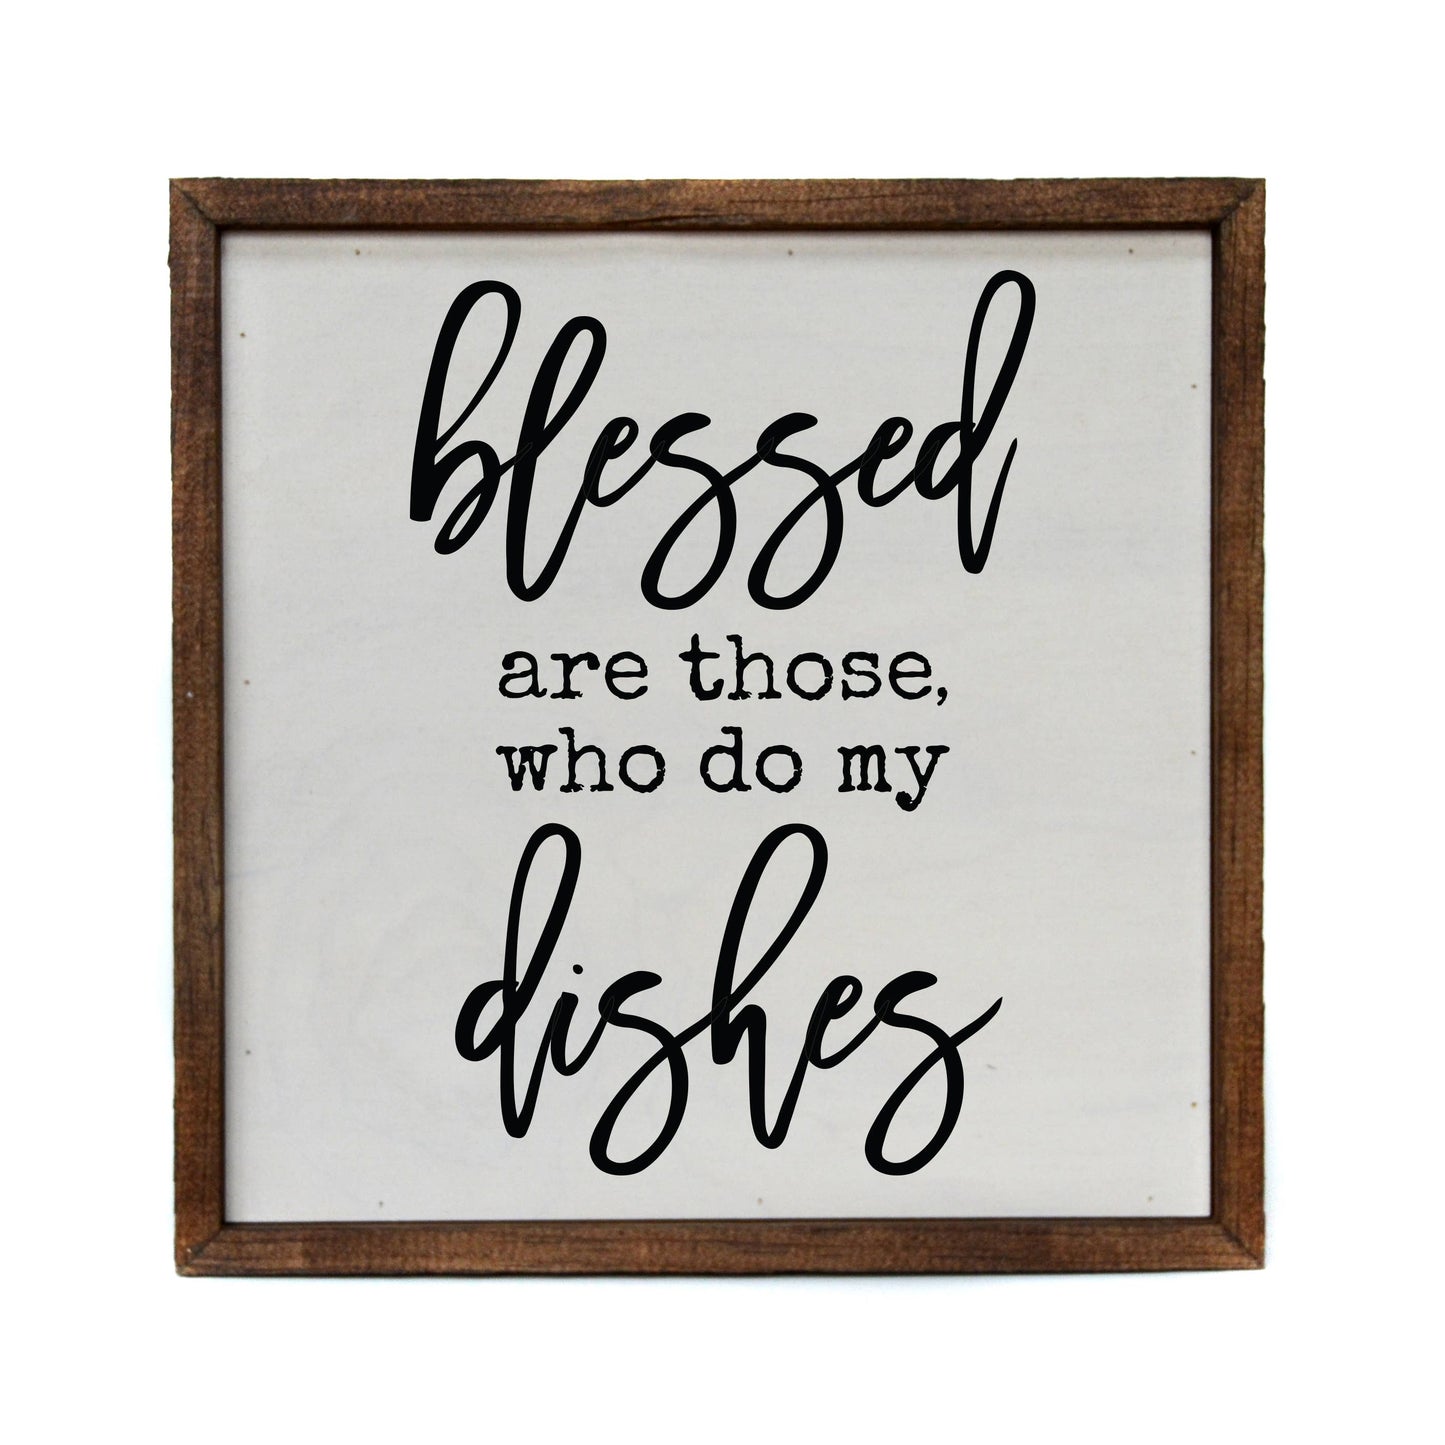 Blessed are those who do my dishes 10x10 kitchen sign